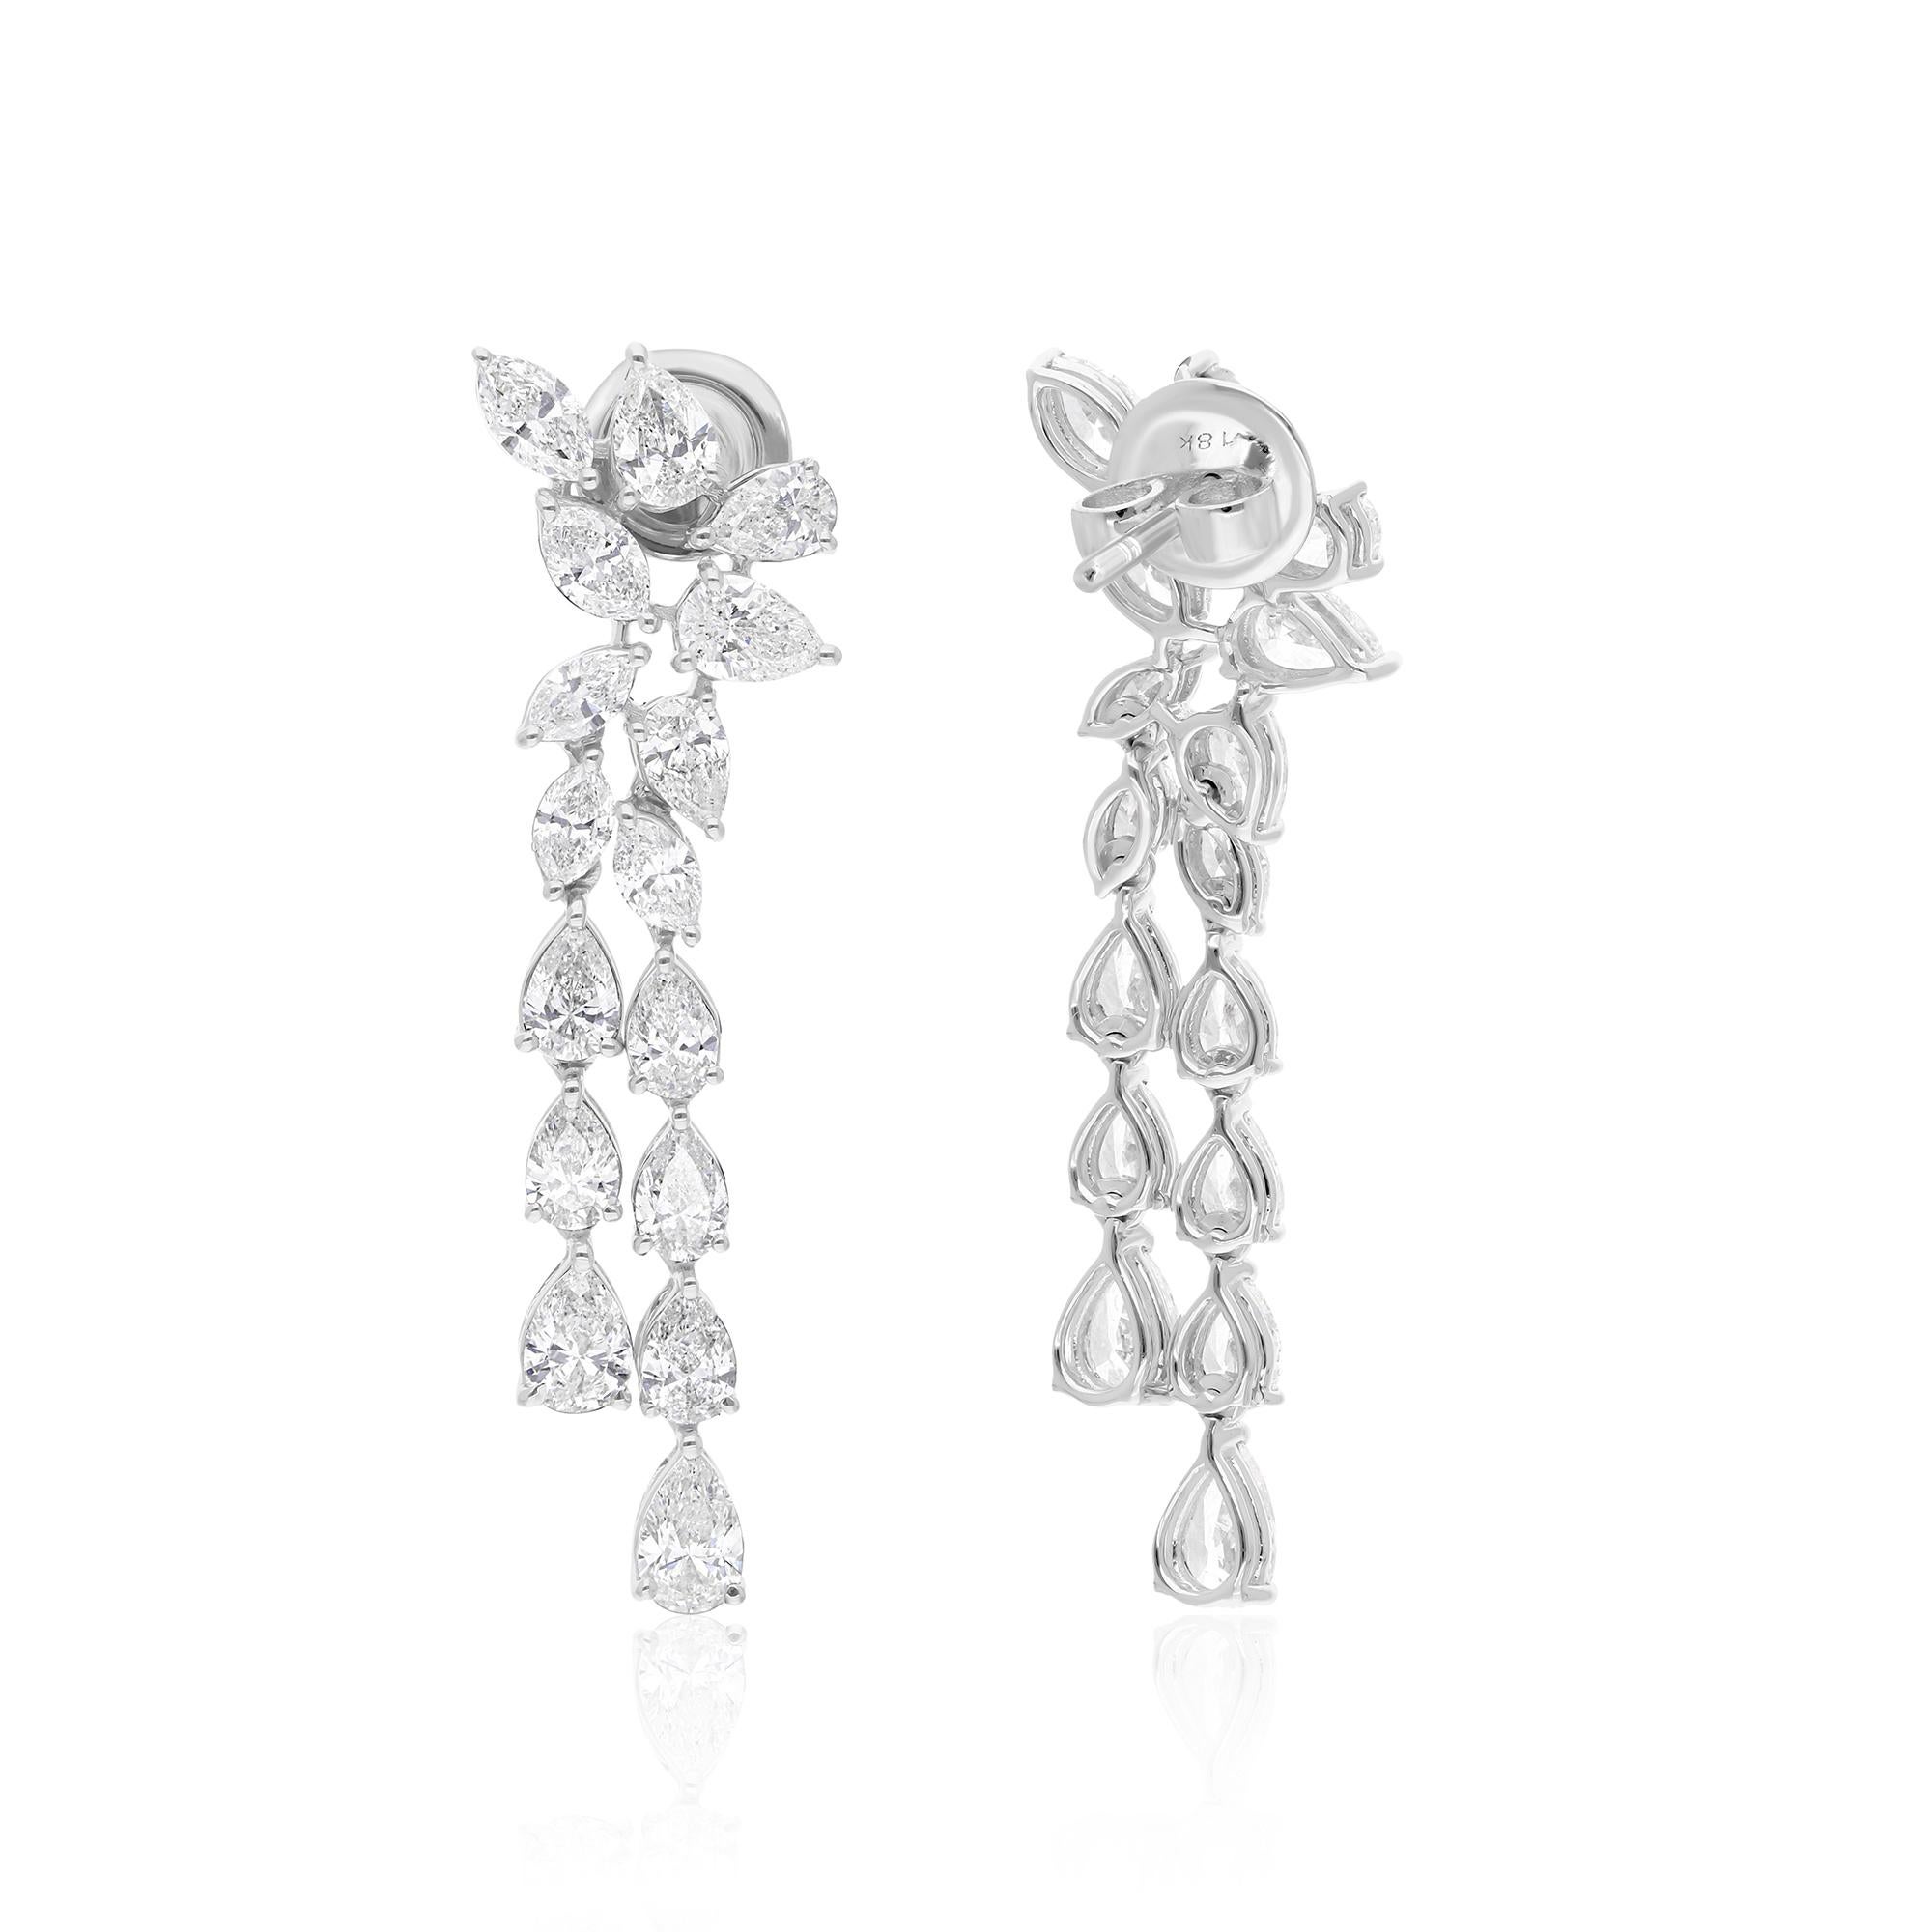 Each earring showcases a stunning combination of pear-cut and marquise-cut diamonds, meticulously arranged to create a harmonious symphony of light and sparkle. The pear-shaped diamonds, with their graceful contours and delicate brilliance, exude a